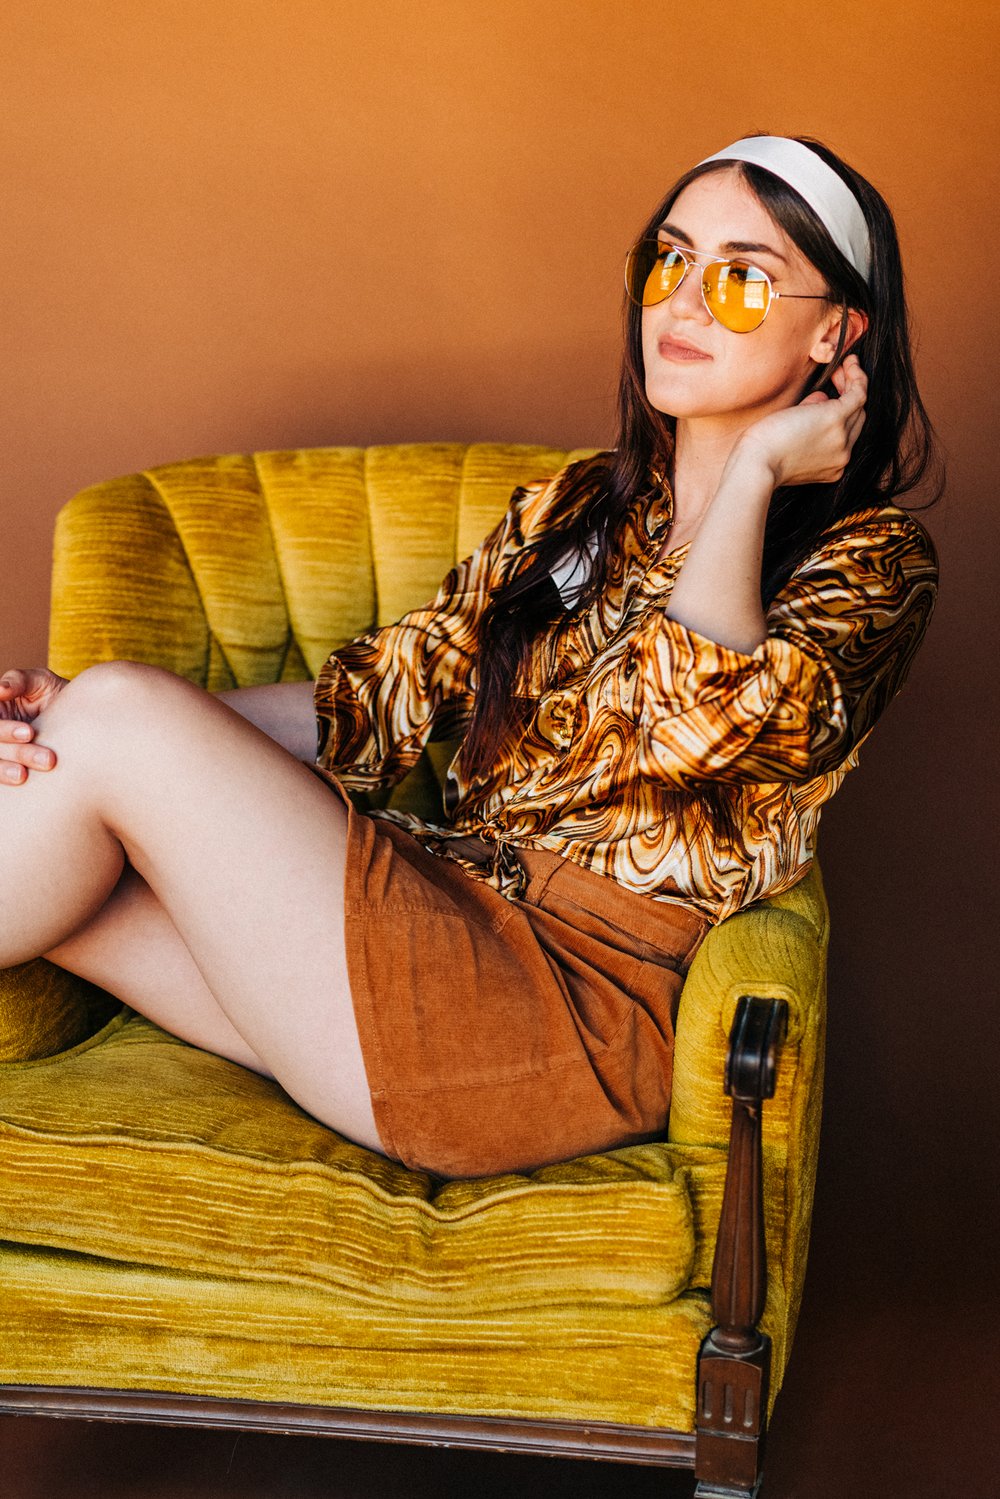 70s inspired creative editorial photoshoot at the suite on federal in downtown youngstown ohio photographed by youngstown wedding photographer mae b photo youngstown family photographer mae b photo-10.jpg